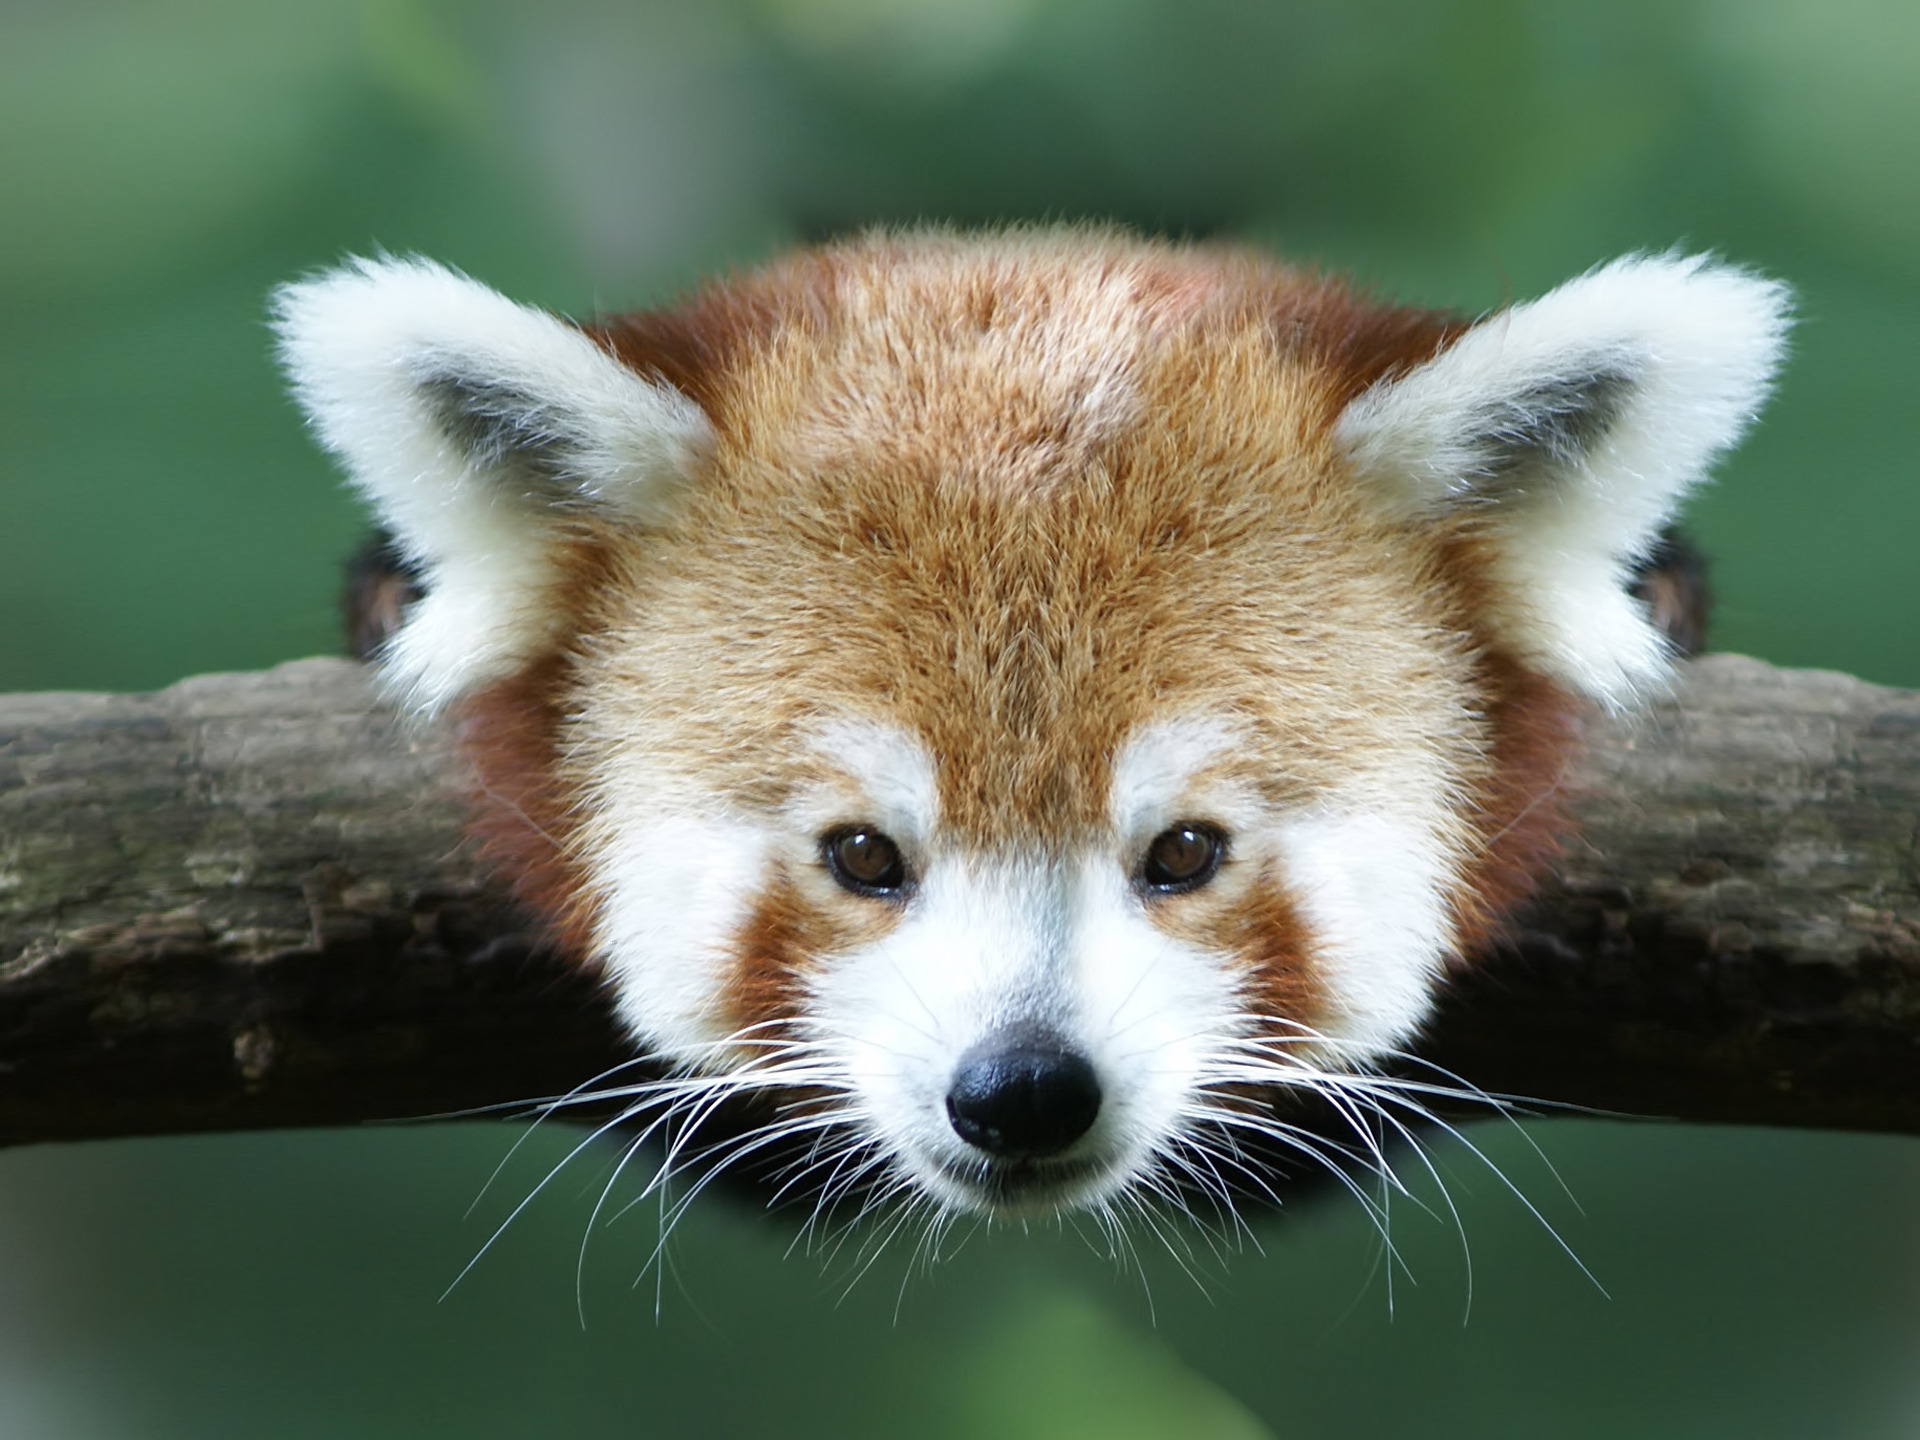 Red panda: A cute animal with fiery fur, perfect for a desktop wallpaper.